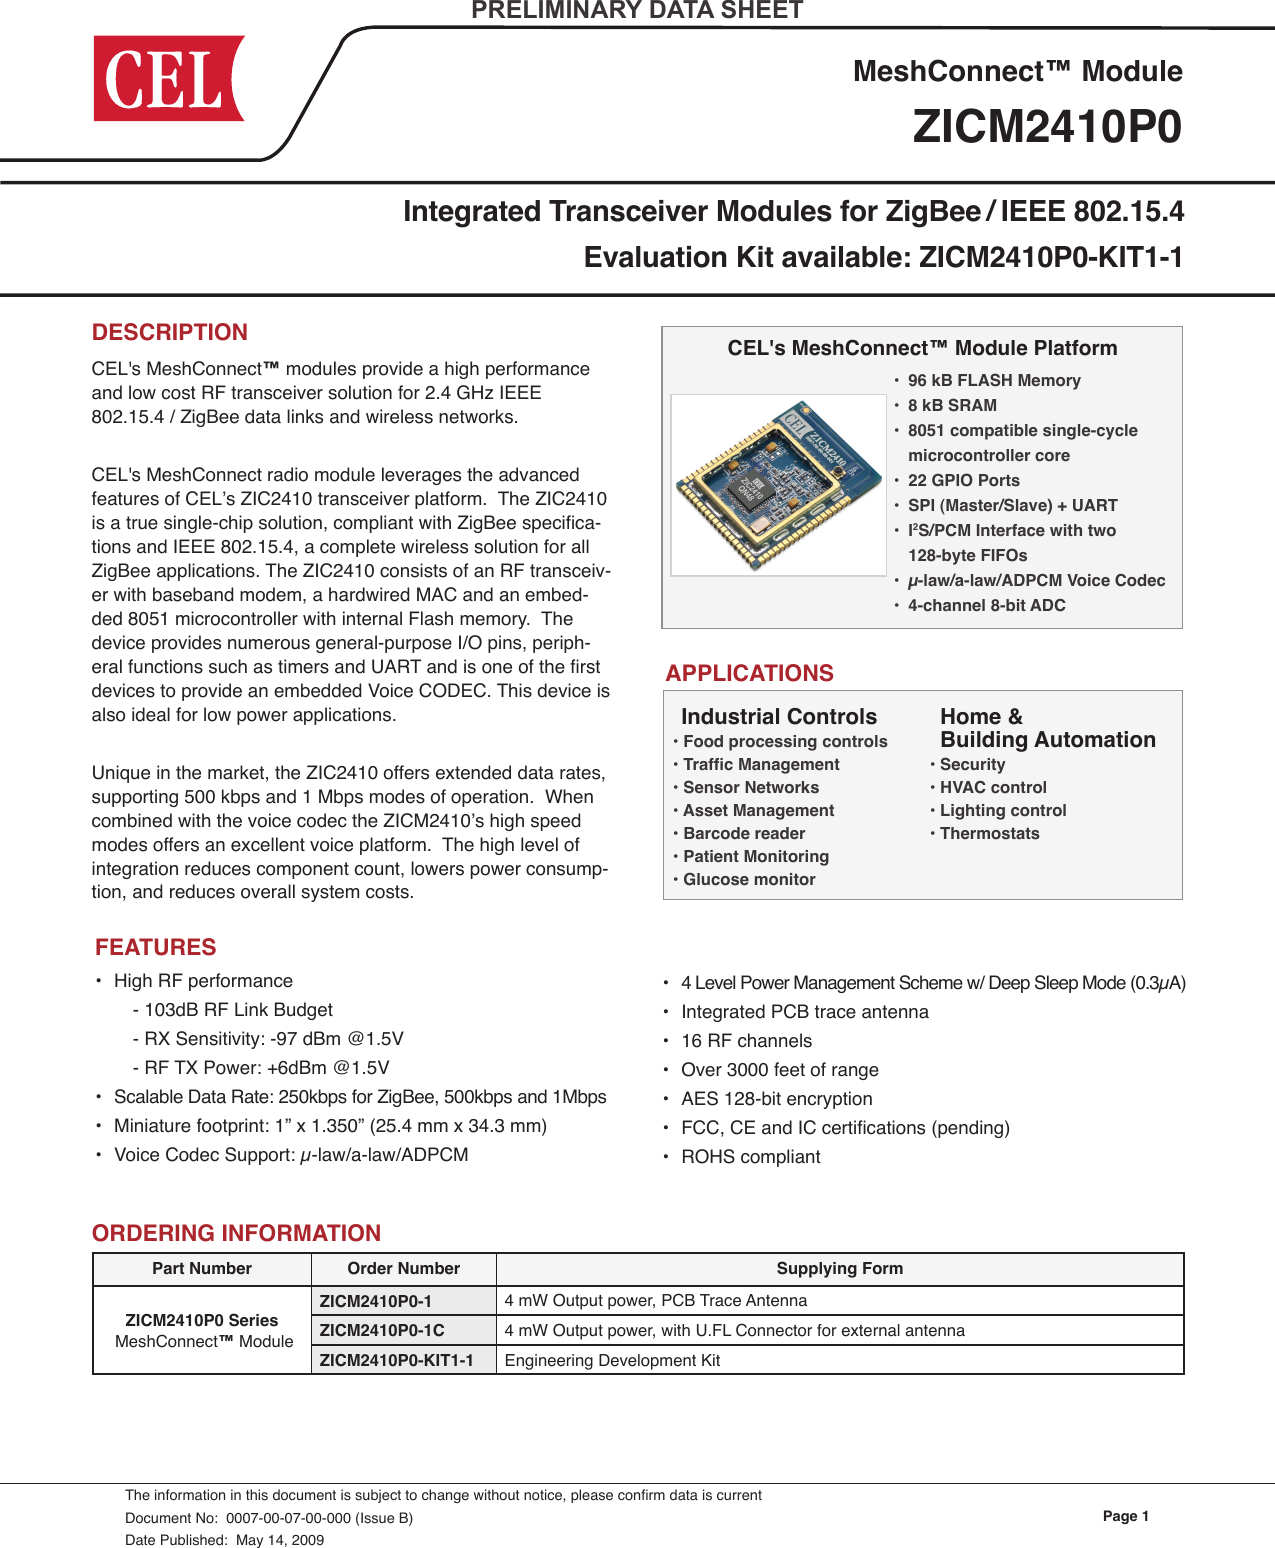 Page 1ZICM2410P0MeshConnect™ ModuleDESCRIPTION CEL&apos;s MeshConnect™ modules provide a high performance and low cost RF transceiver solution for 2.4 GHz IEEE 802.15.4 / ZigBee data links and wireless networks.CEL&apos;s MeshConnect radio module leverages the advanced features of CEL’s ZIC2410 transceiver platform.  The ZIC2410 is a true single-chip solution, compliant with ZigBee specica-tions and IEEE 802.15.4, a complete wireless solution for all ZigBee applications. The ZIC2410 consists of an RF transceiv-er with baseband modem, a hardwired MAC and an embed-ded 8051 microcontroller with internal Flash memory.  The device provides numerous general-purpose I/O pins, periph-eral functions such as timers and UART and is one of the rst devices to provide an embedded Voice CODEC. This device is also ideal for low power applications.Unique in the market, the ZIC2410 offers extended data rates, supporting 500 kbps and 1 Mbps modes of operation.  When combined with the voice codec the ZICM2410’s high speed modes offers an excellent voice platform.  The high level of integration reduces component count, lowers power consump-tion, and reduces overall system costs. Integrated Transceiver Modules for ZigBee / IEEE 802.15.4Evaluation Kit available: ZICM2410P0-KIT1-1The information in this document is subject to change without notice, please conrm data is currentDocument No:  0007-00-07-00-000 (Issue B)Date Published:  May 14, 2009PRELIMINARY DATA SHEETCEL&apos;s MeshConnect™ Module PlatformAPPLICATIONSORDERING INFORMATIONPart Number Order Number Supplying FormZICM2410P0 Series  MeshConnect™ ModuleZICM2410P0-1 4 mW Output power, PCB Trace AntennaZICM2410P0-1C 4 mW Output power, with U.FL Connector for external antennaZICM2410P0-KIT1-1 Engineering Development Kit•  High RF performance    - 103dB RF Link Budget    - RX Sensitivity: -97 dBm @1.5V    - RF TX Power: +6dBm @1.5V•  Scalable Data Rate: 250kbps for ZigBee, 500kbps and 1Mbps•  Miniature footprint: 1” x 1.350” (25.4 mm x 34.3 mm)•  Voice Codec Support: µ-law/a-law/ADPCM FEATURESHome &amp;  Building Automation • Security• HVAC control• Lighting control• ThermostatsIndustrial Controls• Food processing controls• Trafc Management• Sensor Networks• Asset Management• Barcode reader• Patient Monitoring• Glucose monitor•  4 Level Power Management Scheme w/ Deep Sleep Mode (0.3µA)•  Integrated PCB trace antenna•  16 RF channels•  Over 3000 feet of range•  AES 128-bit encryption•  FCC, CE and IC certications (pending)•  ROHS compliant•  96 kB FLASH Memory•  8 kB SRAM•  8051 compatible single-cycle    microcontroller core•  22 GPIO Ports•  SPI (Master/Slave) + UART•  I2S/PCM Interface with two   128-byte FIFOs •  µ-law/a-law/ADPCM Voice Codec•  4-channel 8-bit ADC 